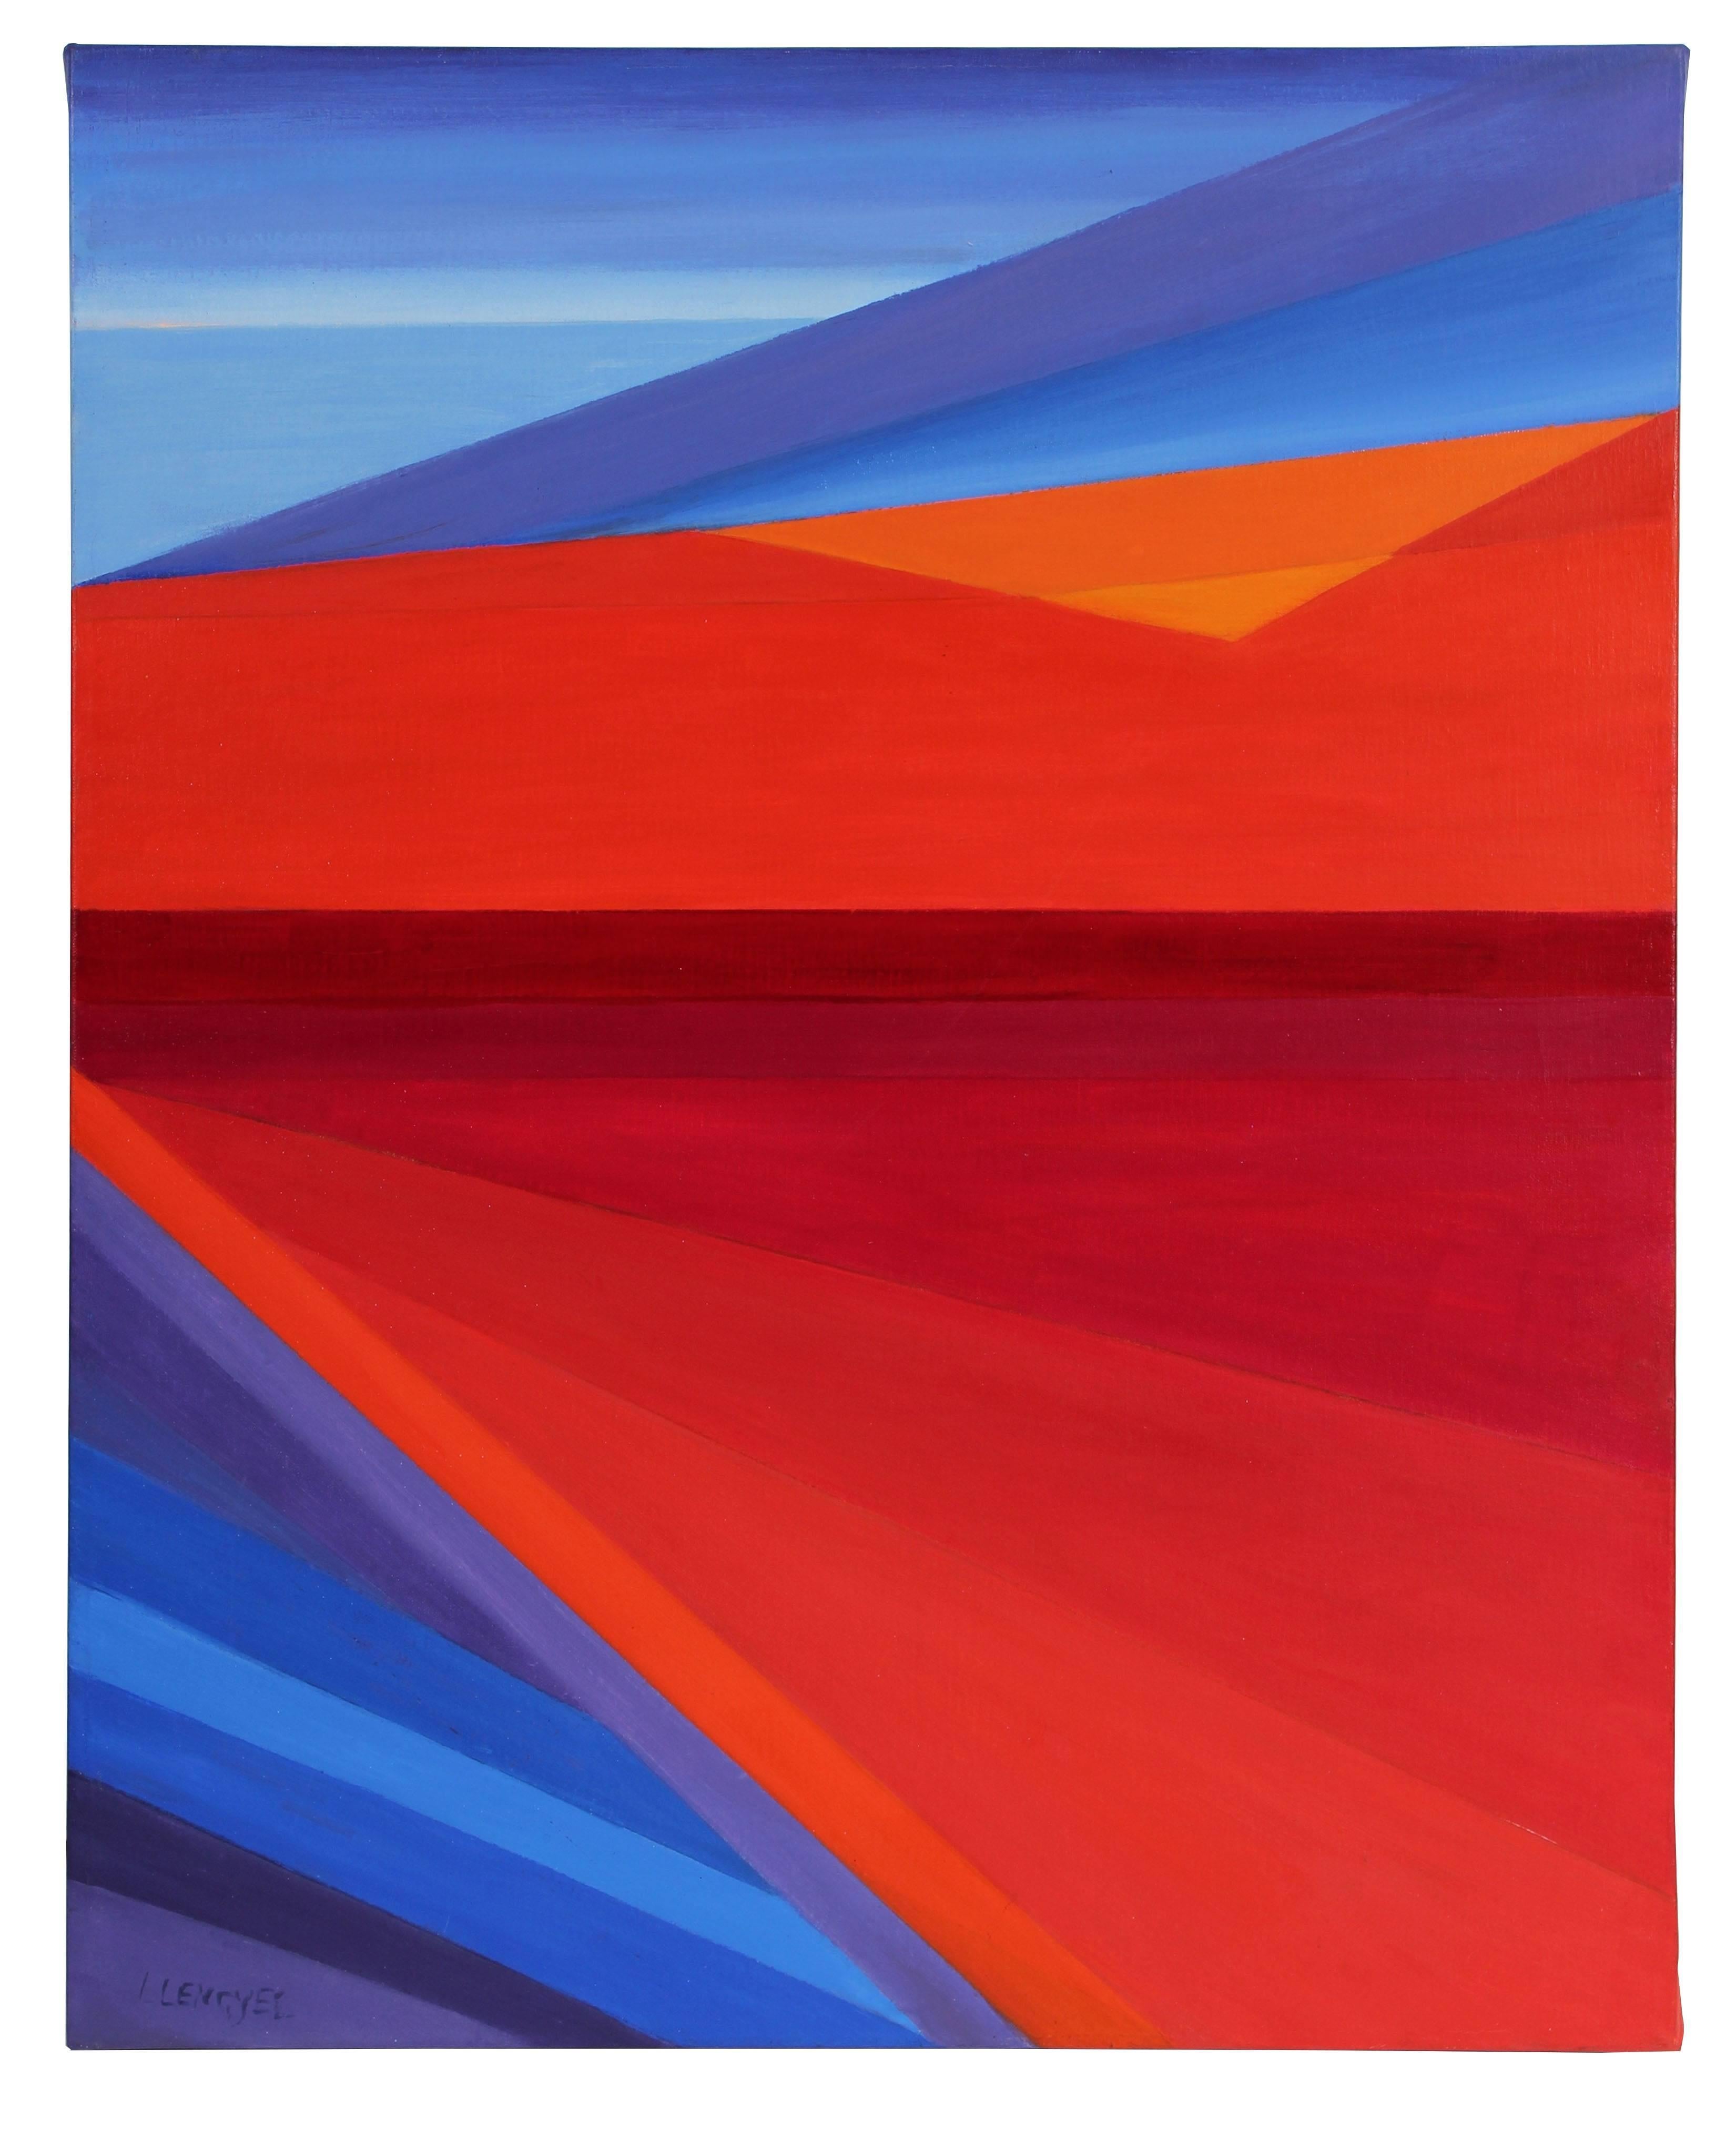 Laura Lengyel Abstract Painting - "Deconstructed Landscape I" Large Geometric Abstract in Oil, 2012